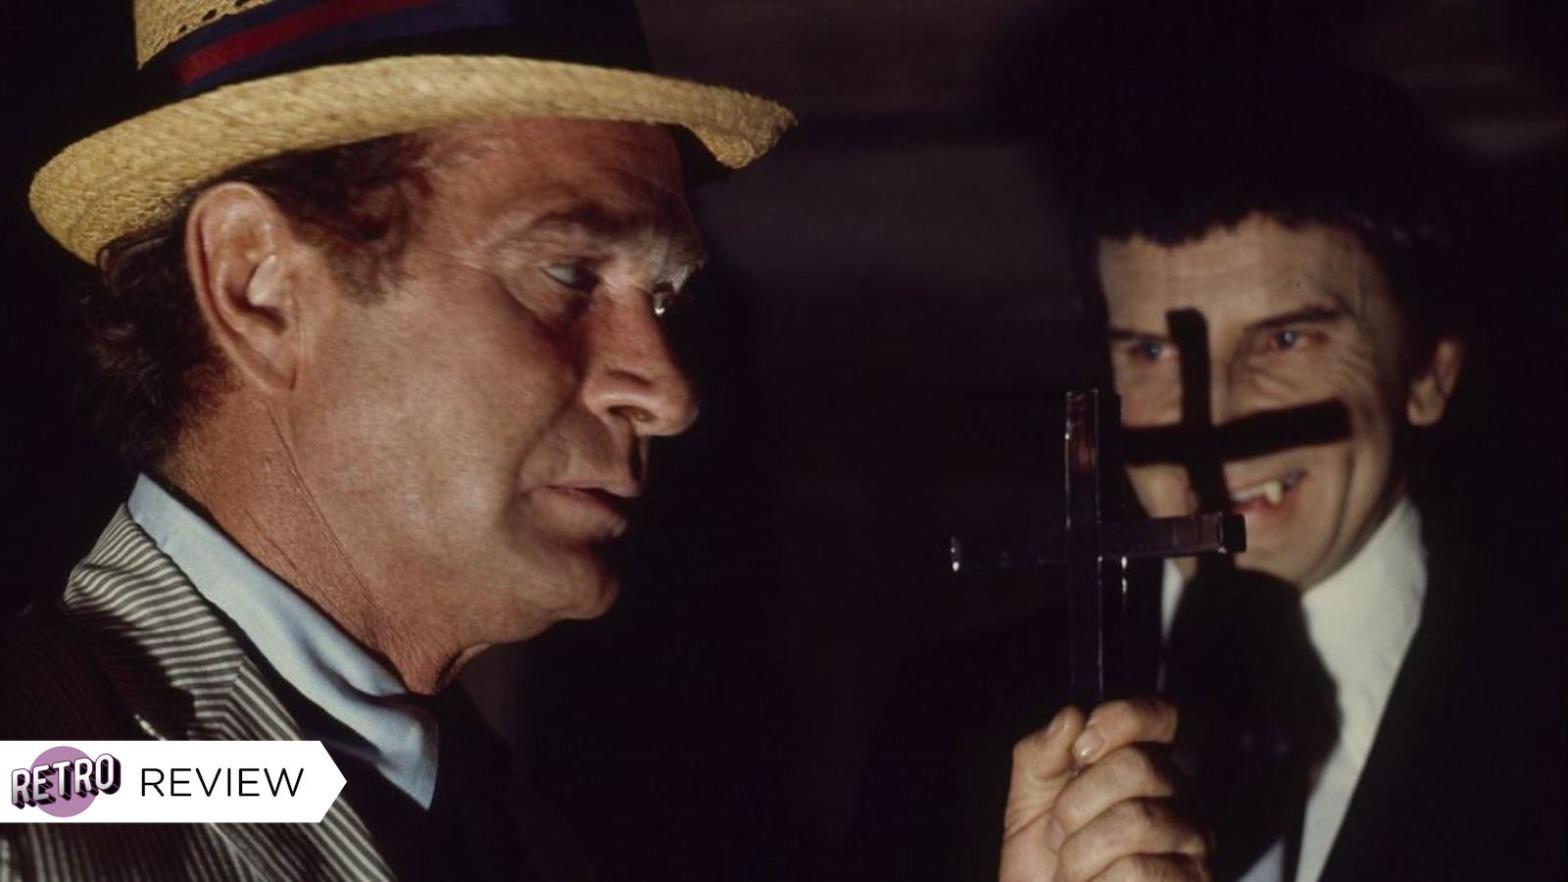 Darren McGavin as reporter Carl Kolchak and Barry Atwater as Janos Skorzeny, the vampire. (Image: ABC)